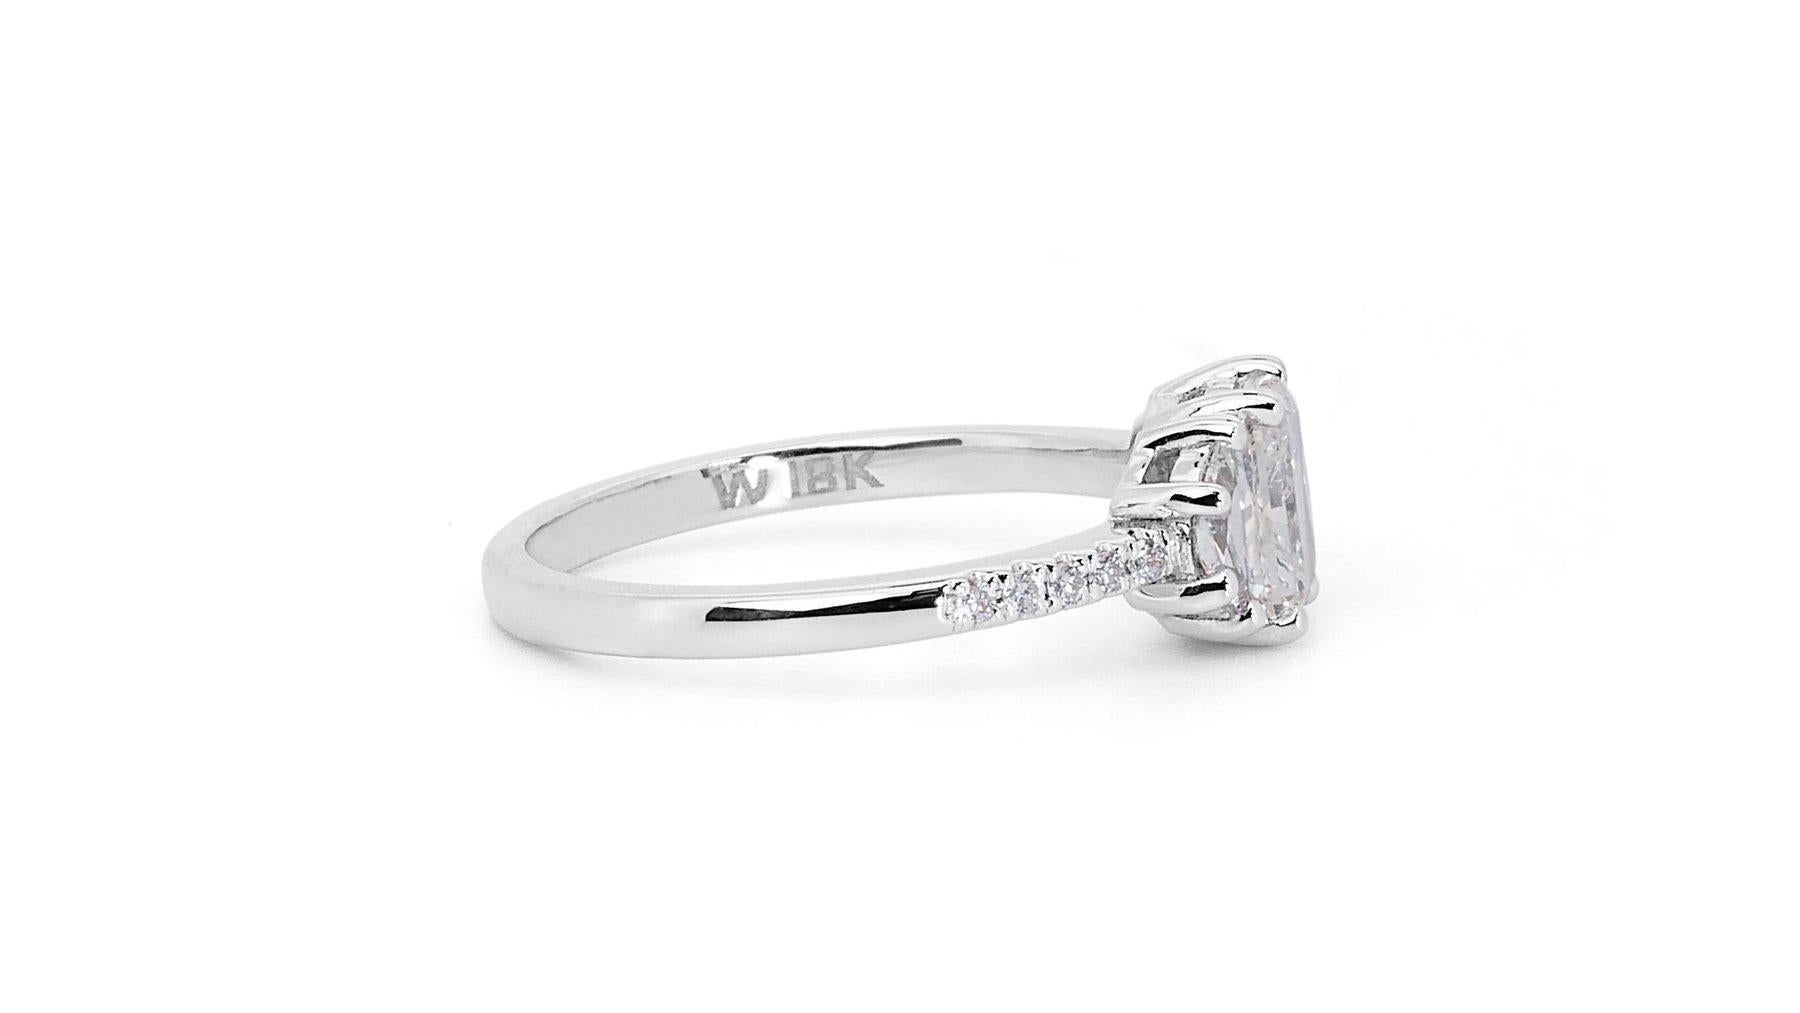 Elegant 1.32ct Diamond Pave Ring in 18K White Gold - GIA Certified

This sophisticated diamond ring in 18K white gold showcases a stunning 1.01-carat, cut-cornered rectangular diamond. Complementing the centerpiece, the ring is adorned with 2